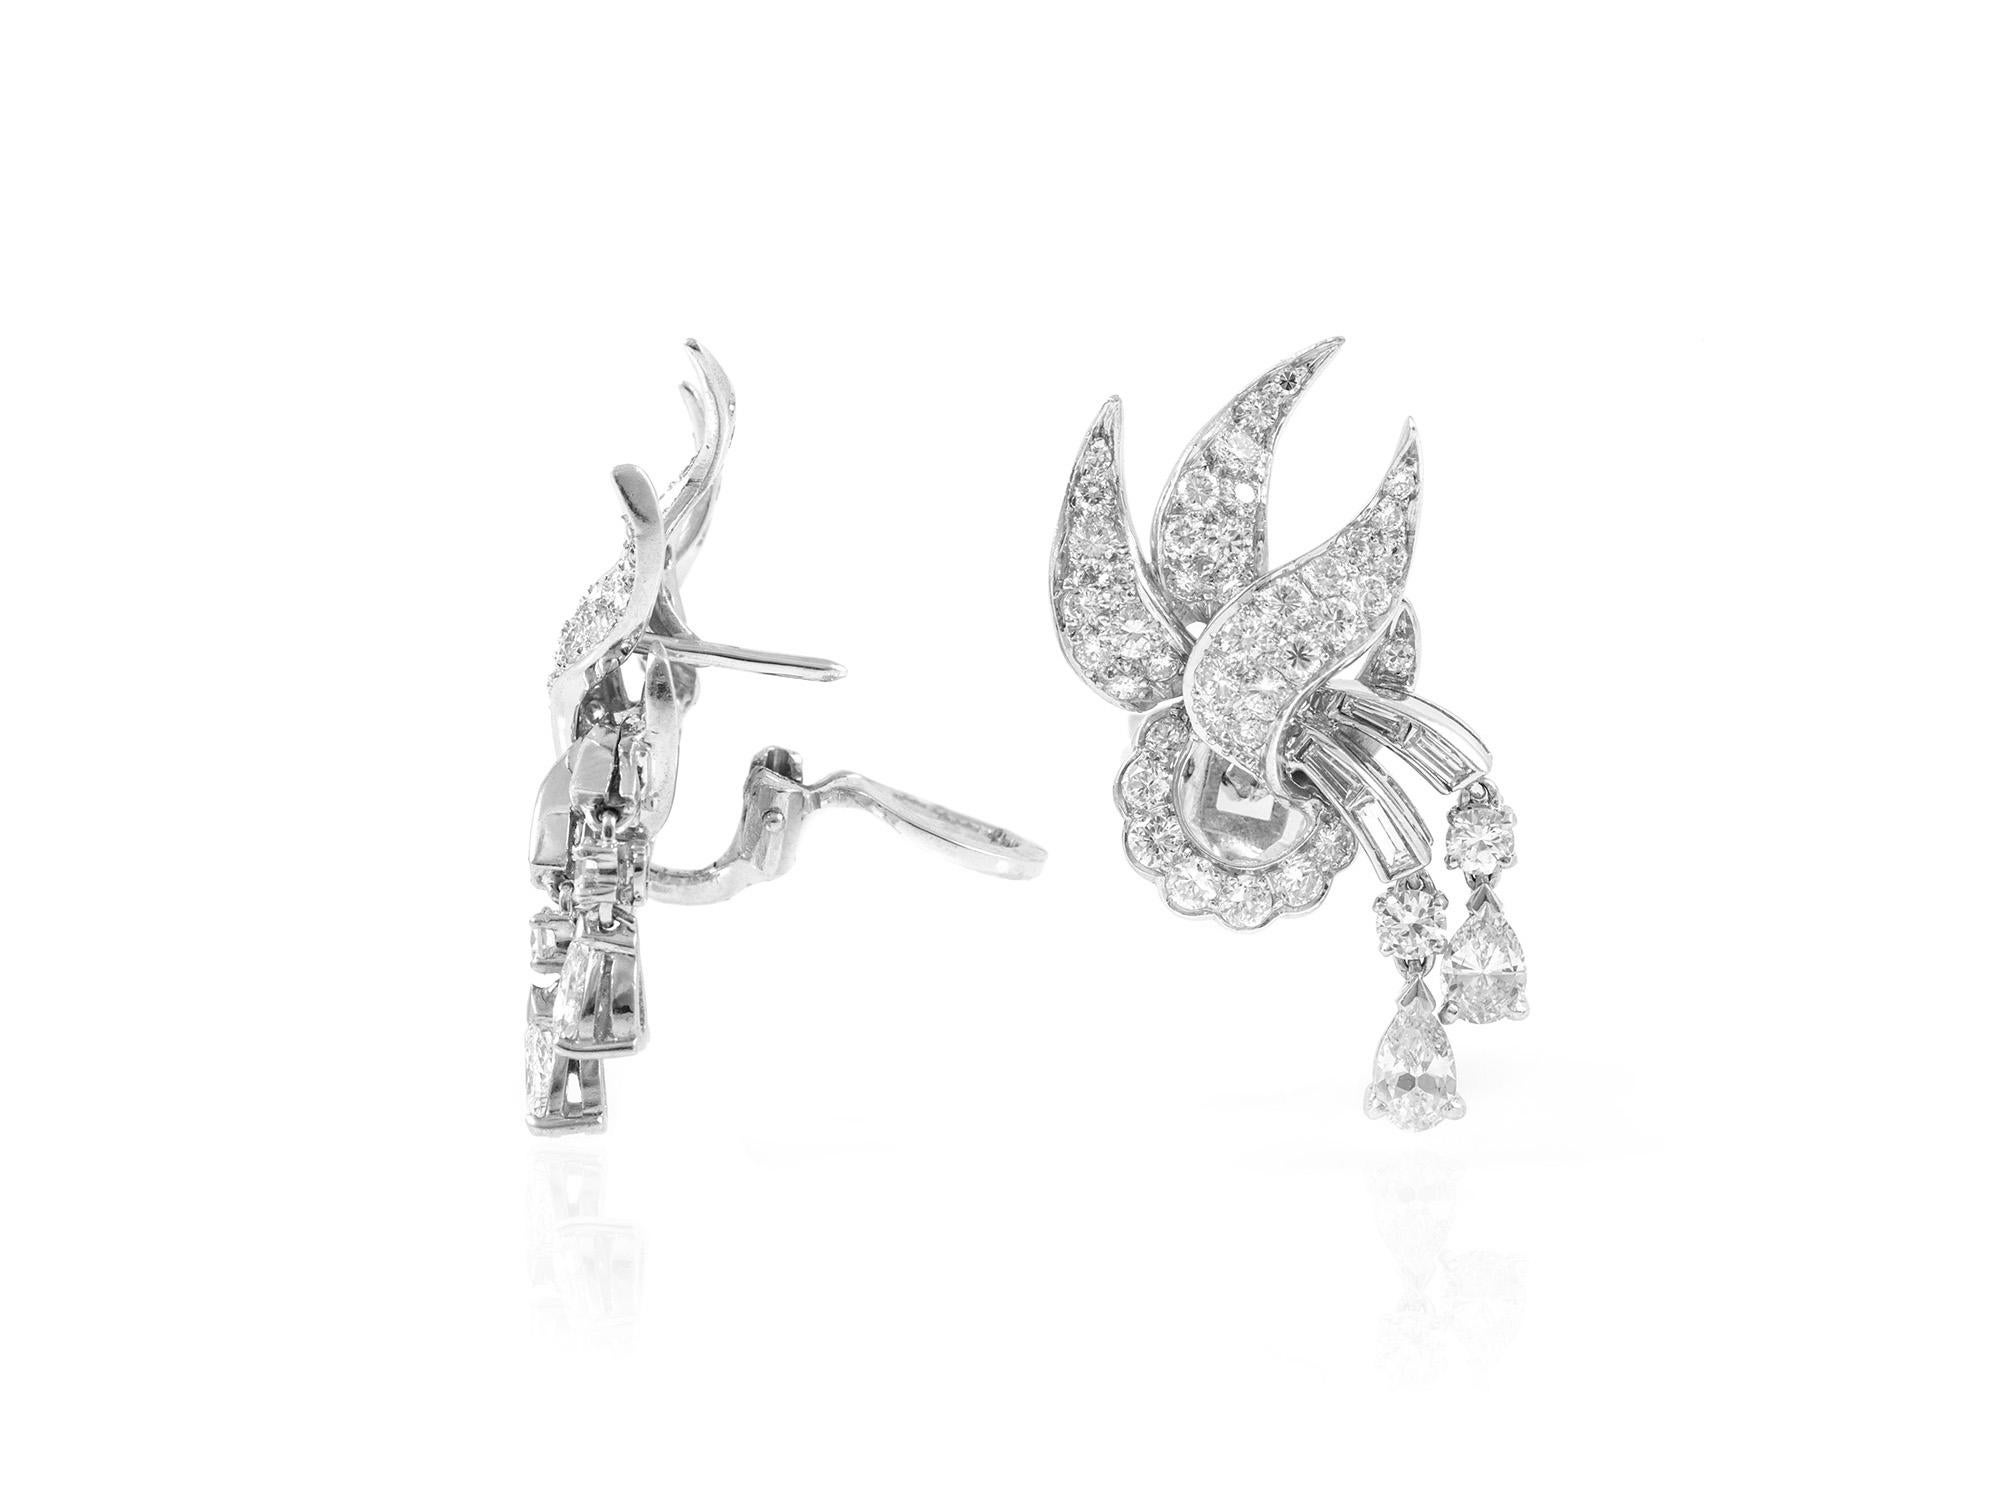 The earrings are finely crafted in platinum with round and pear shape that weighing approximately total of 5.00 carat.